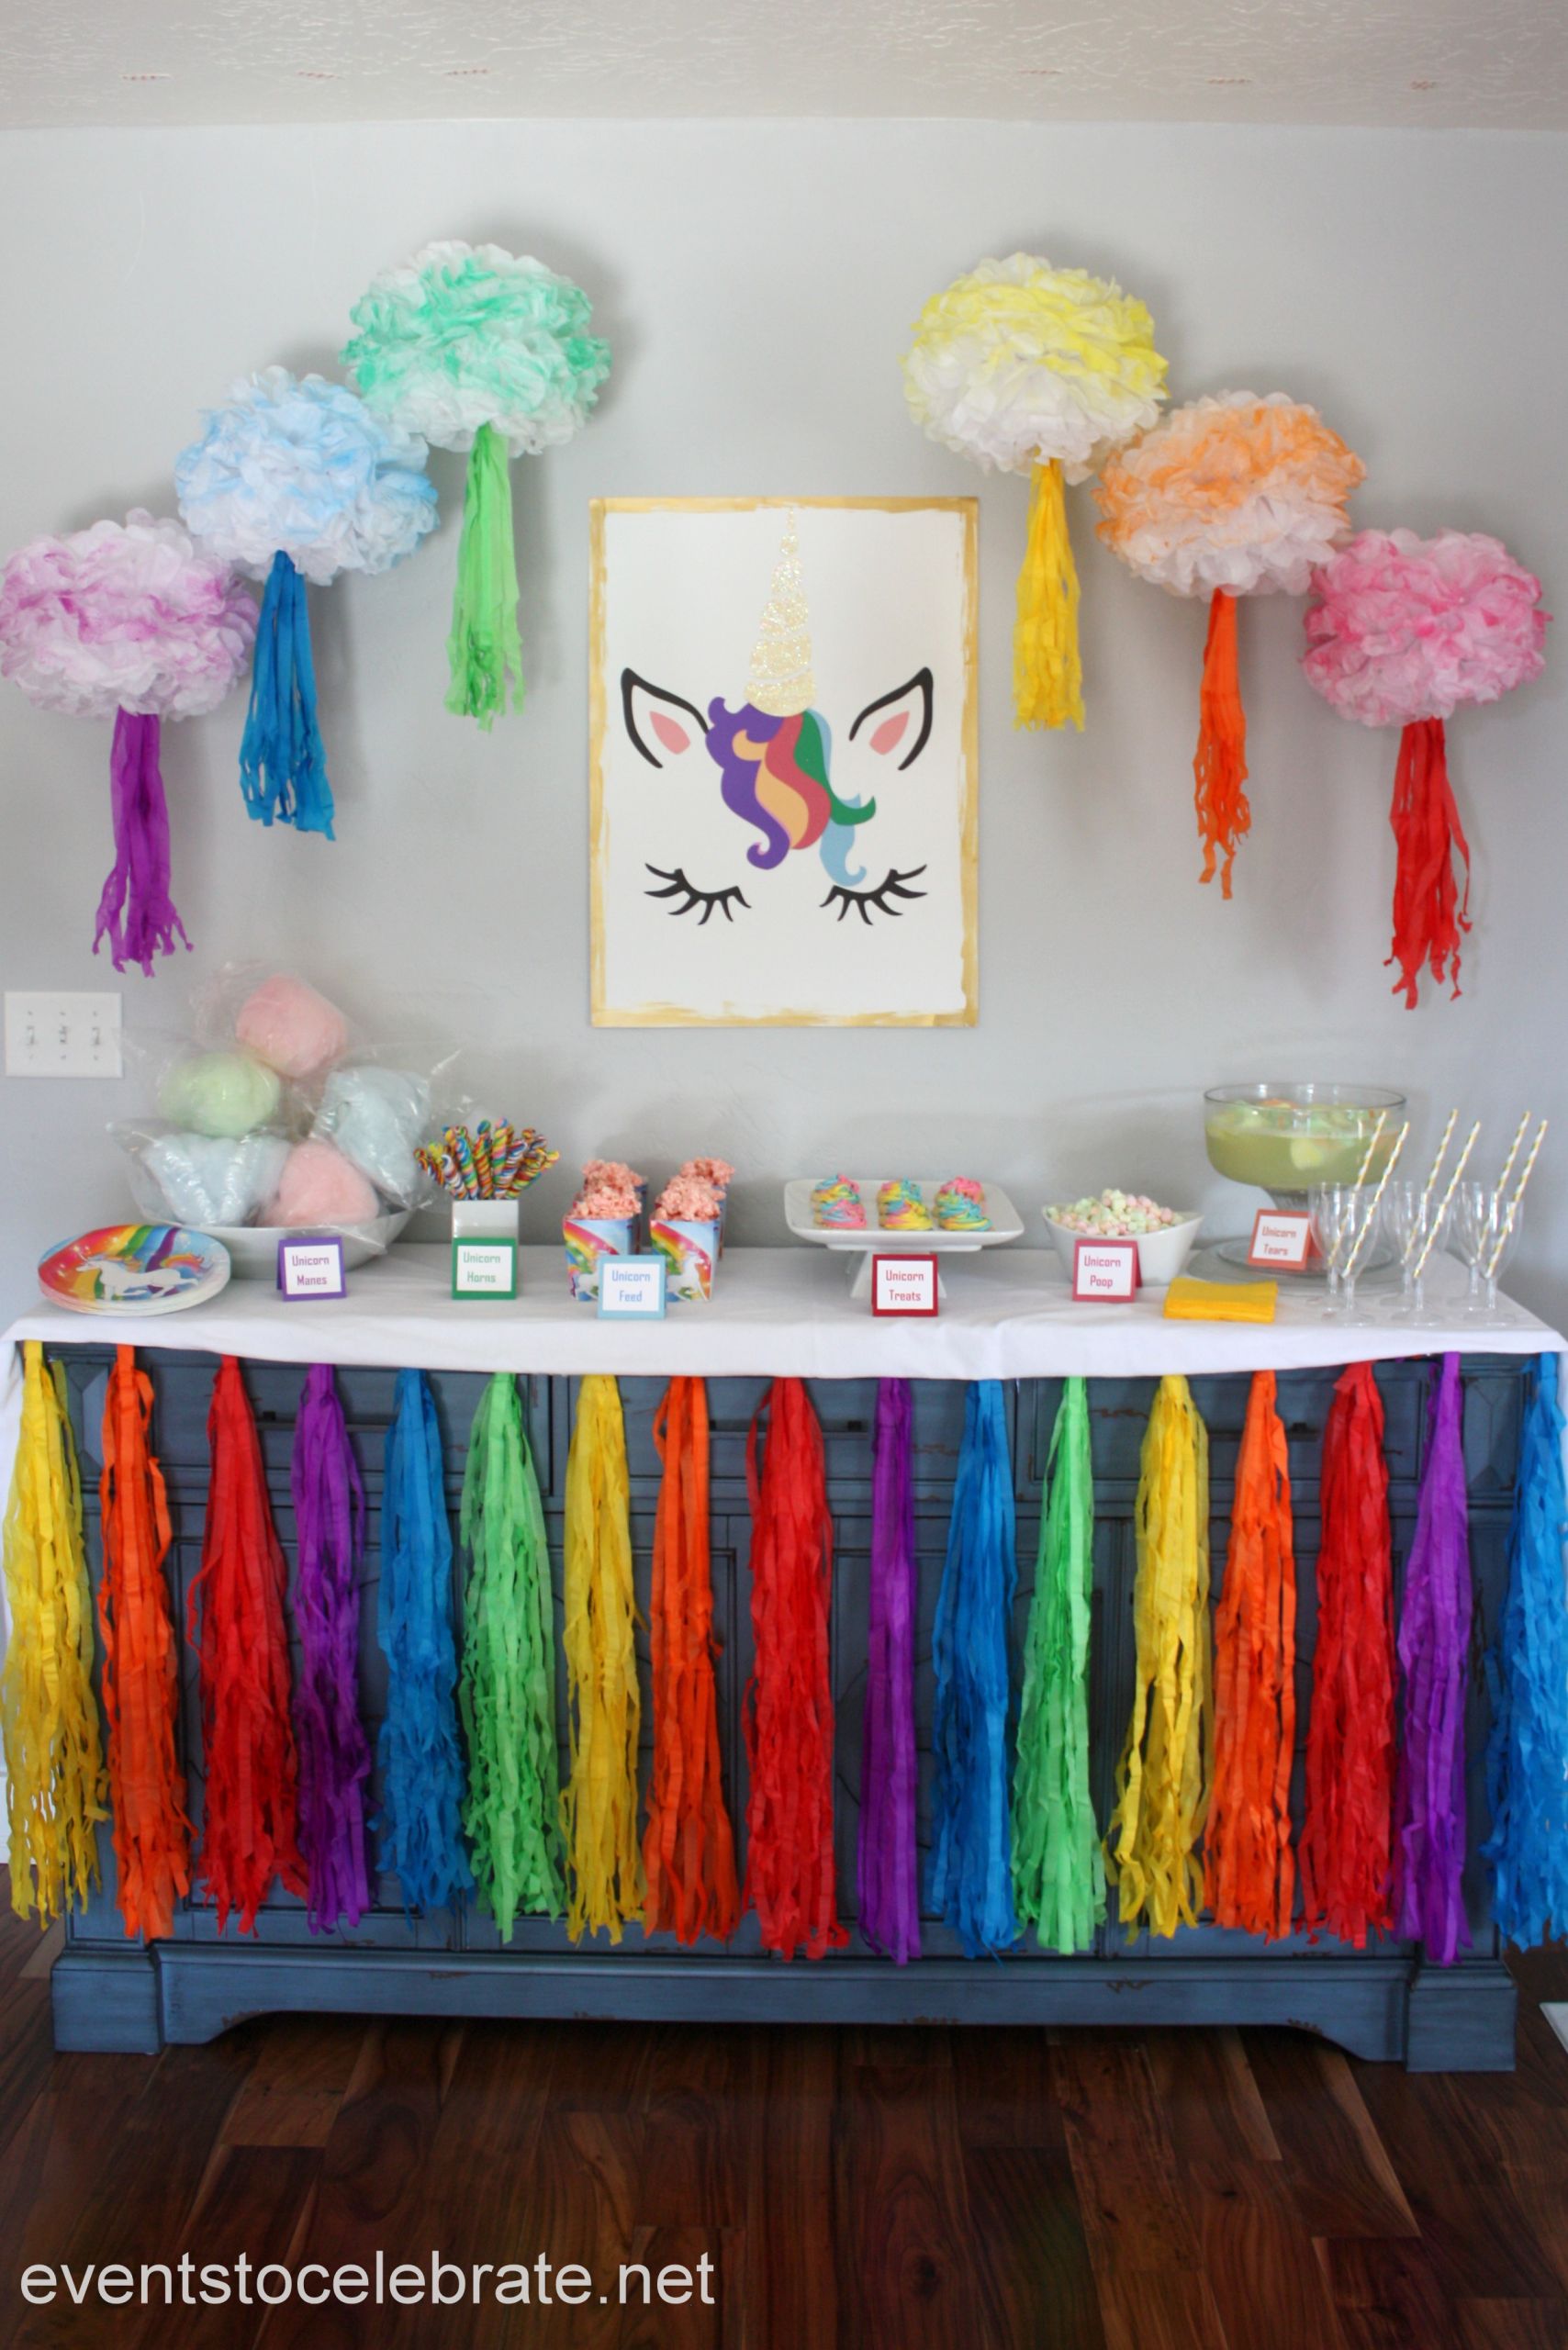 Party Ideas Unicorn Food Glass
 Unicorn Party Decorations and Food